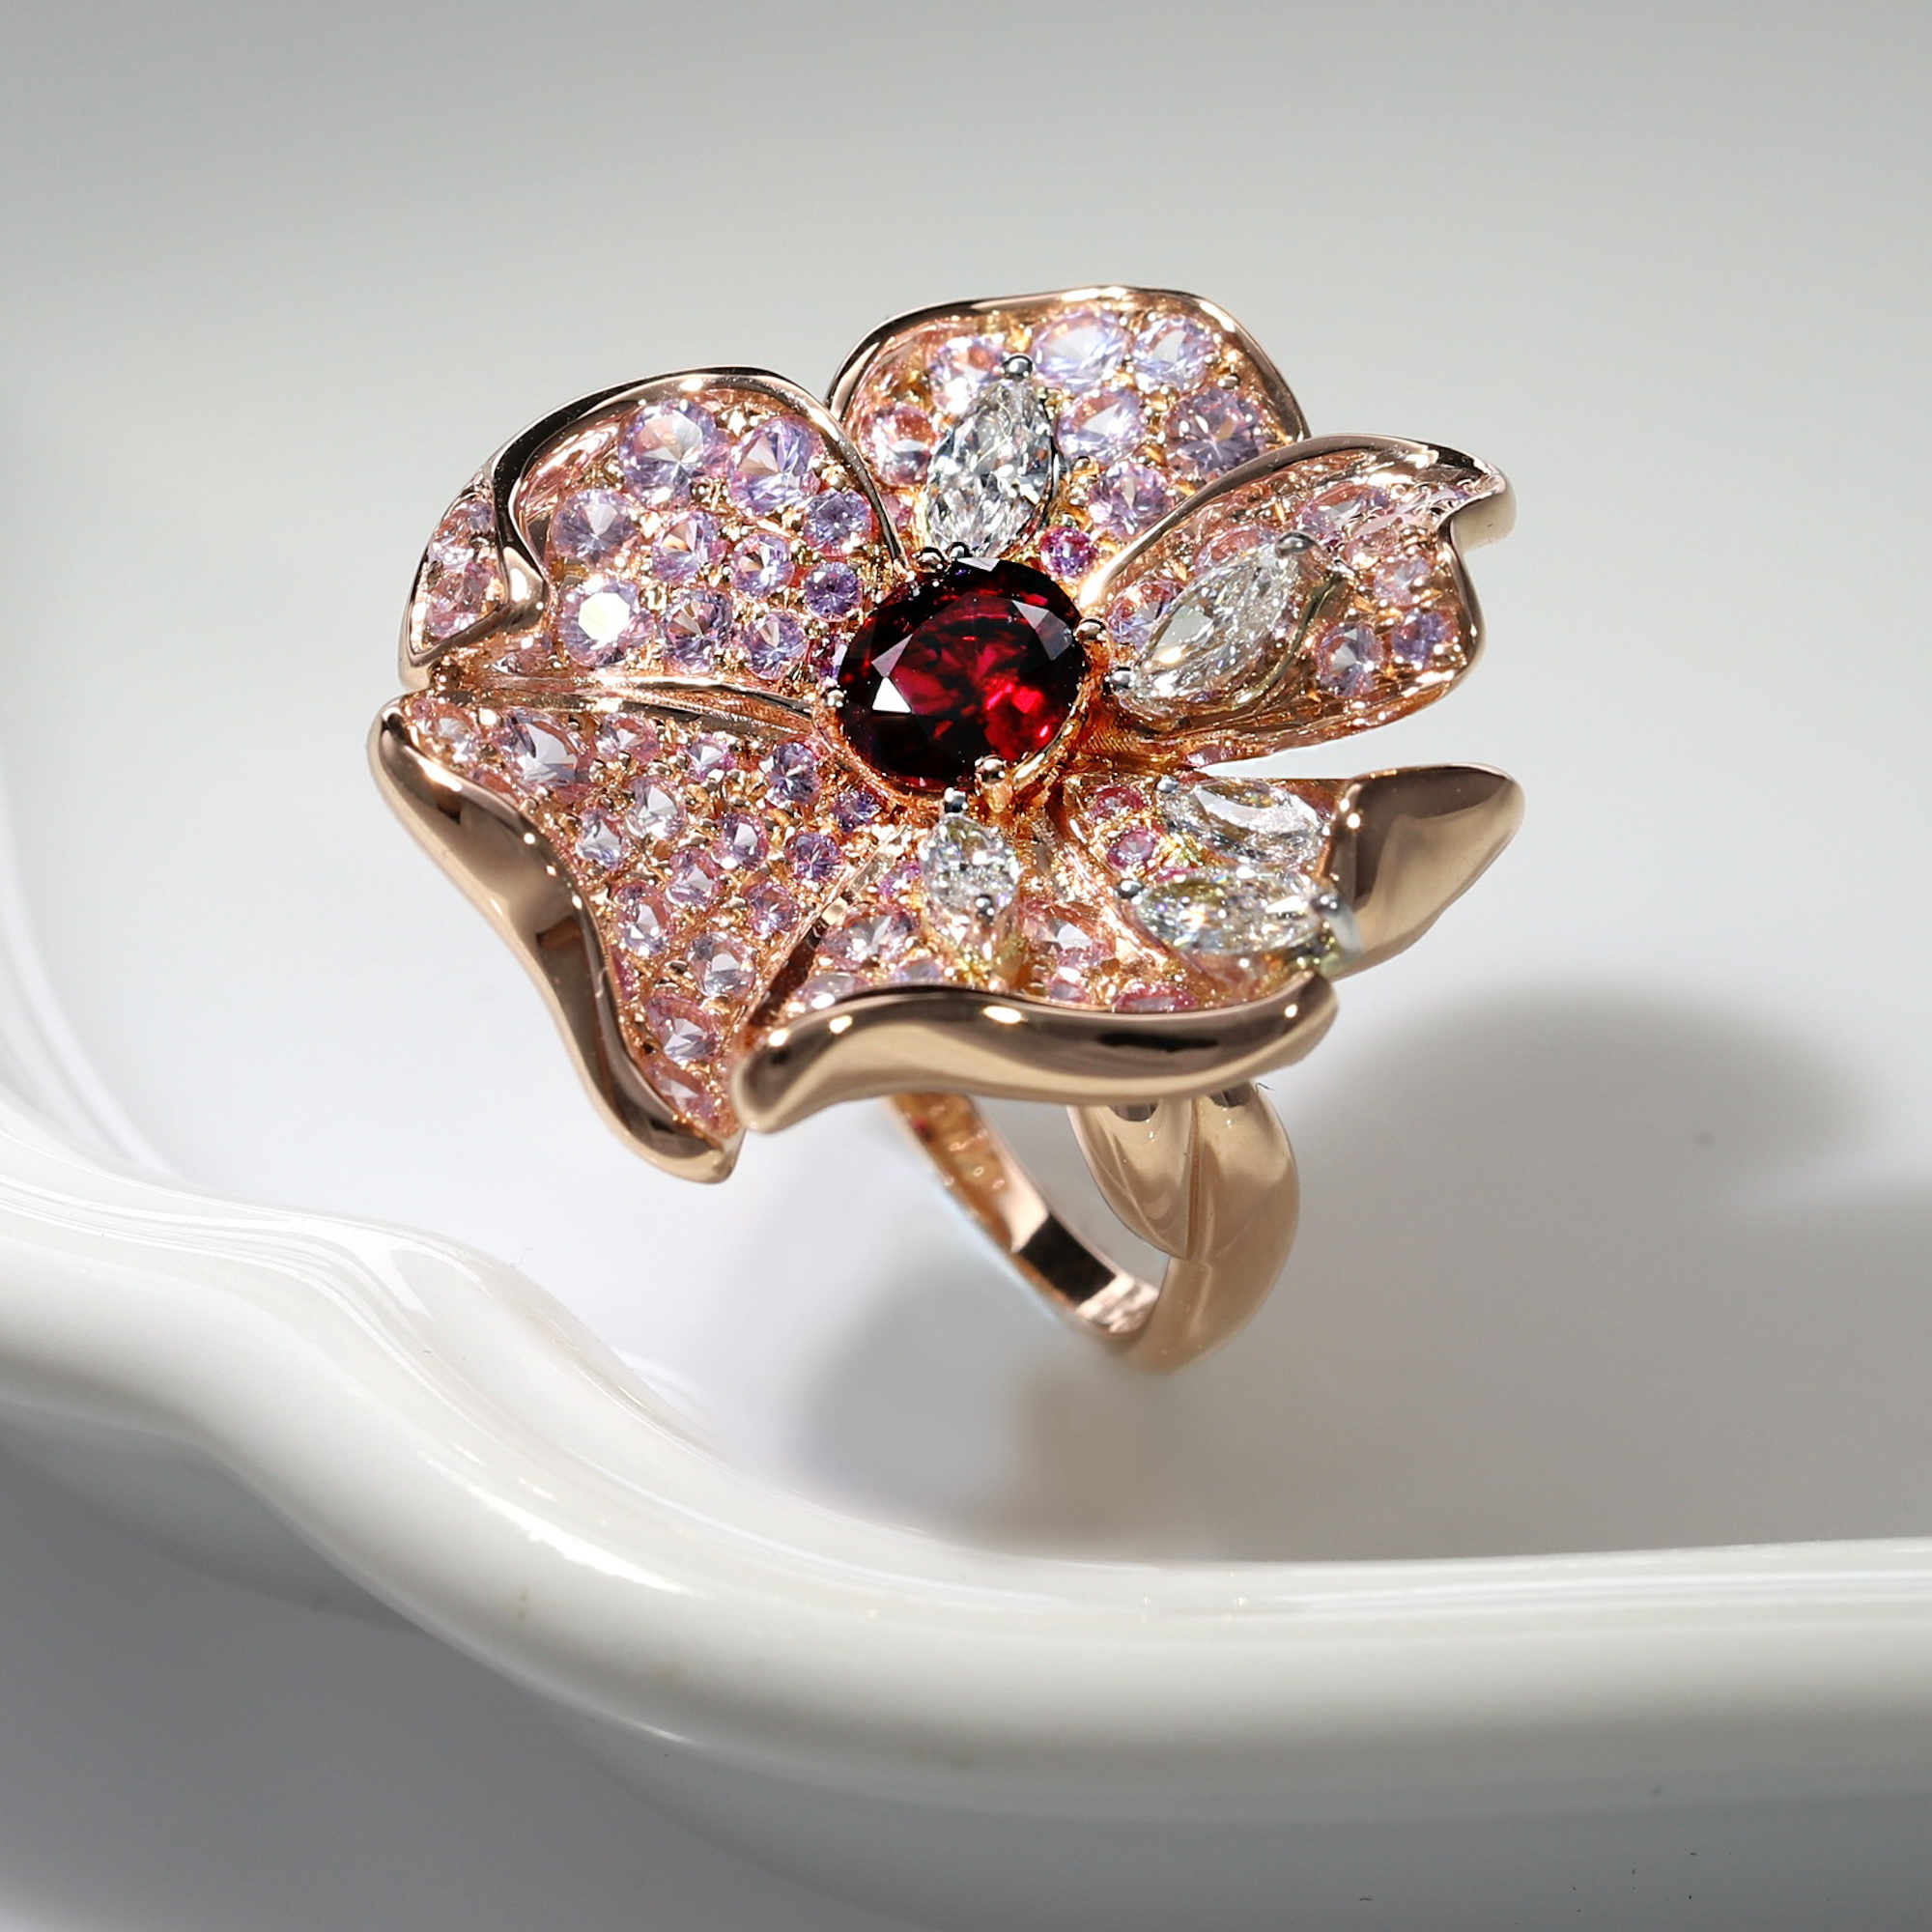 A guide to rubies: an exquisite red gemstone